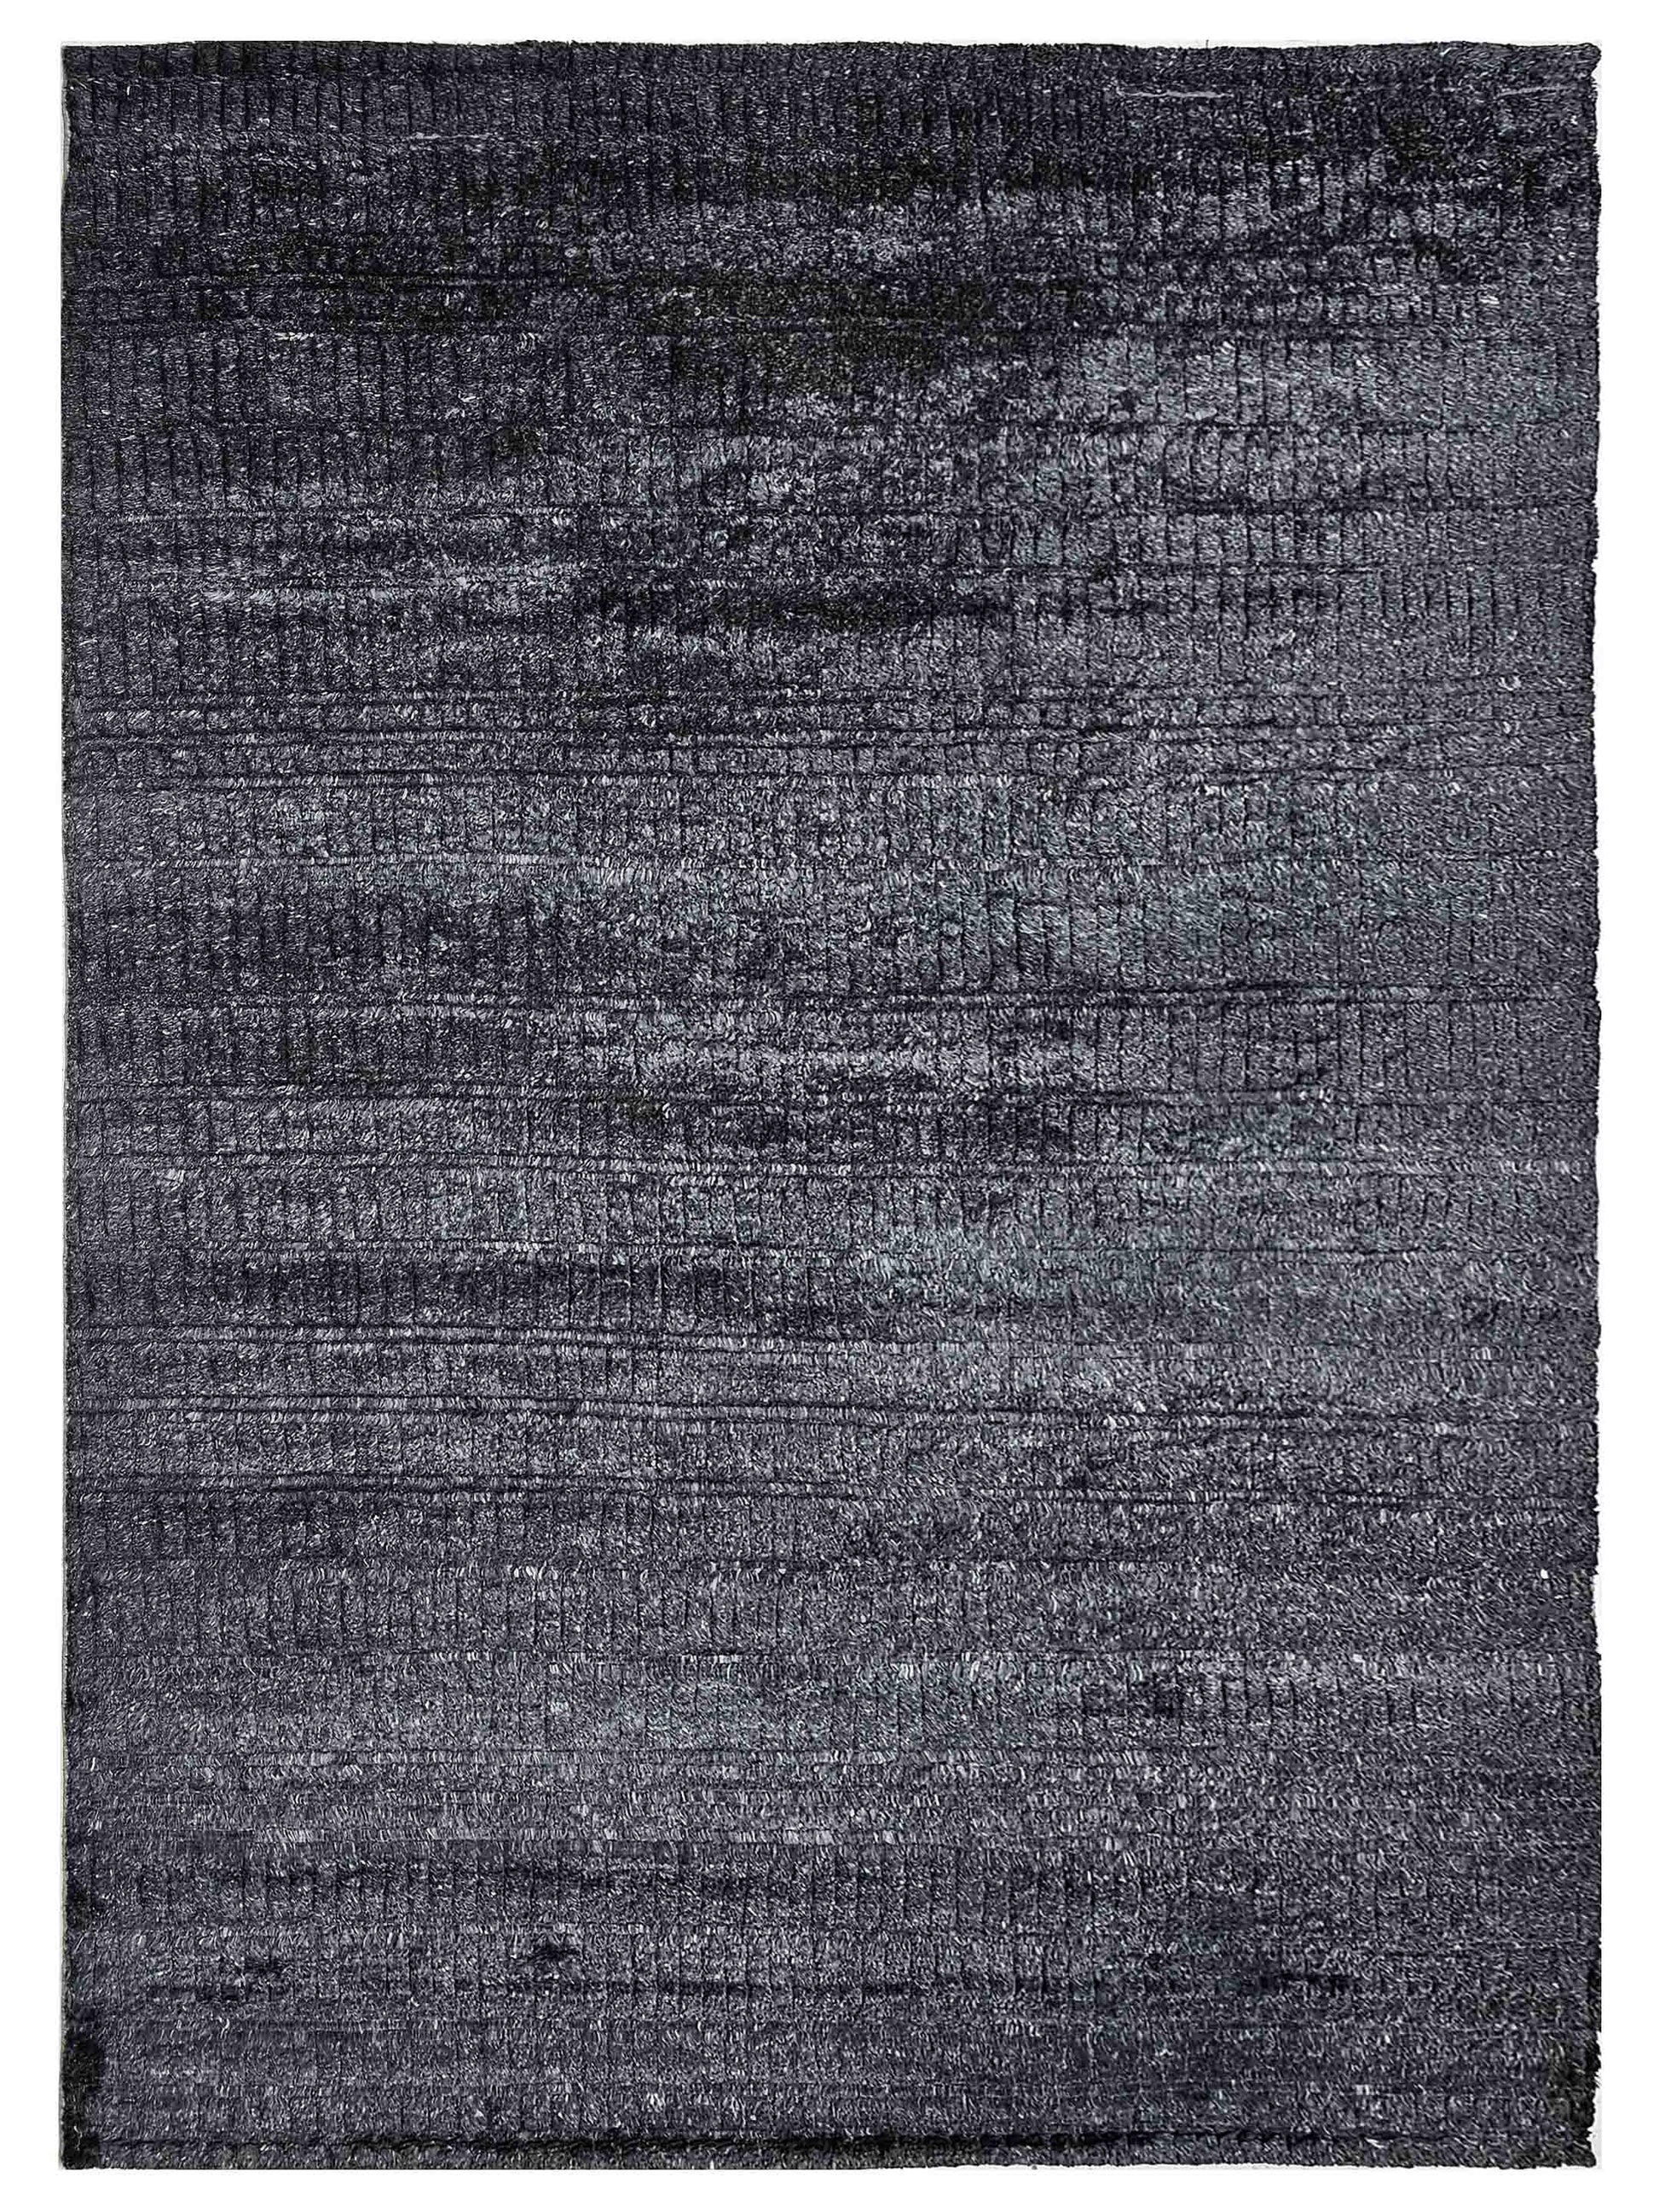 Artisan Marion MO-10412-C Black Transitional Knotted Rug